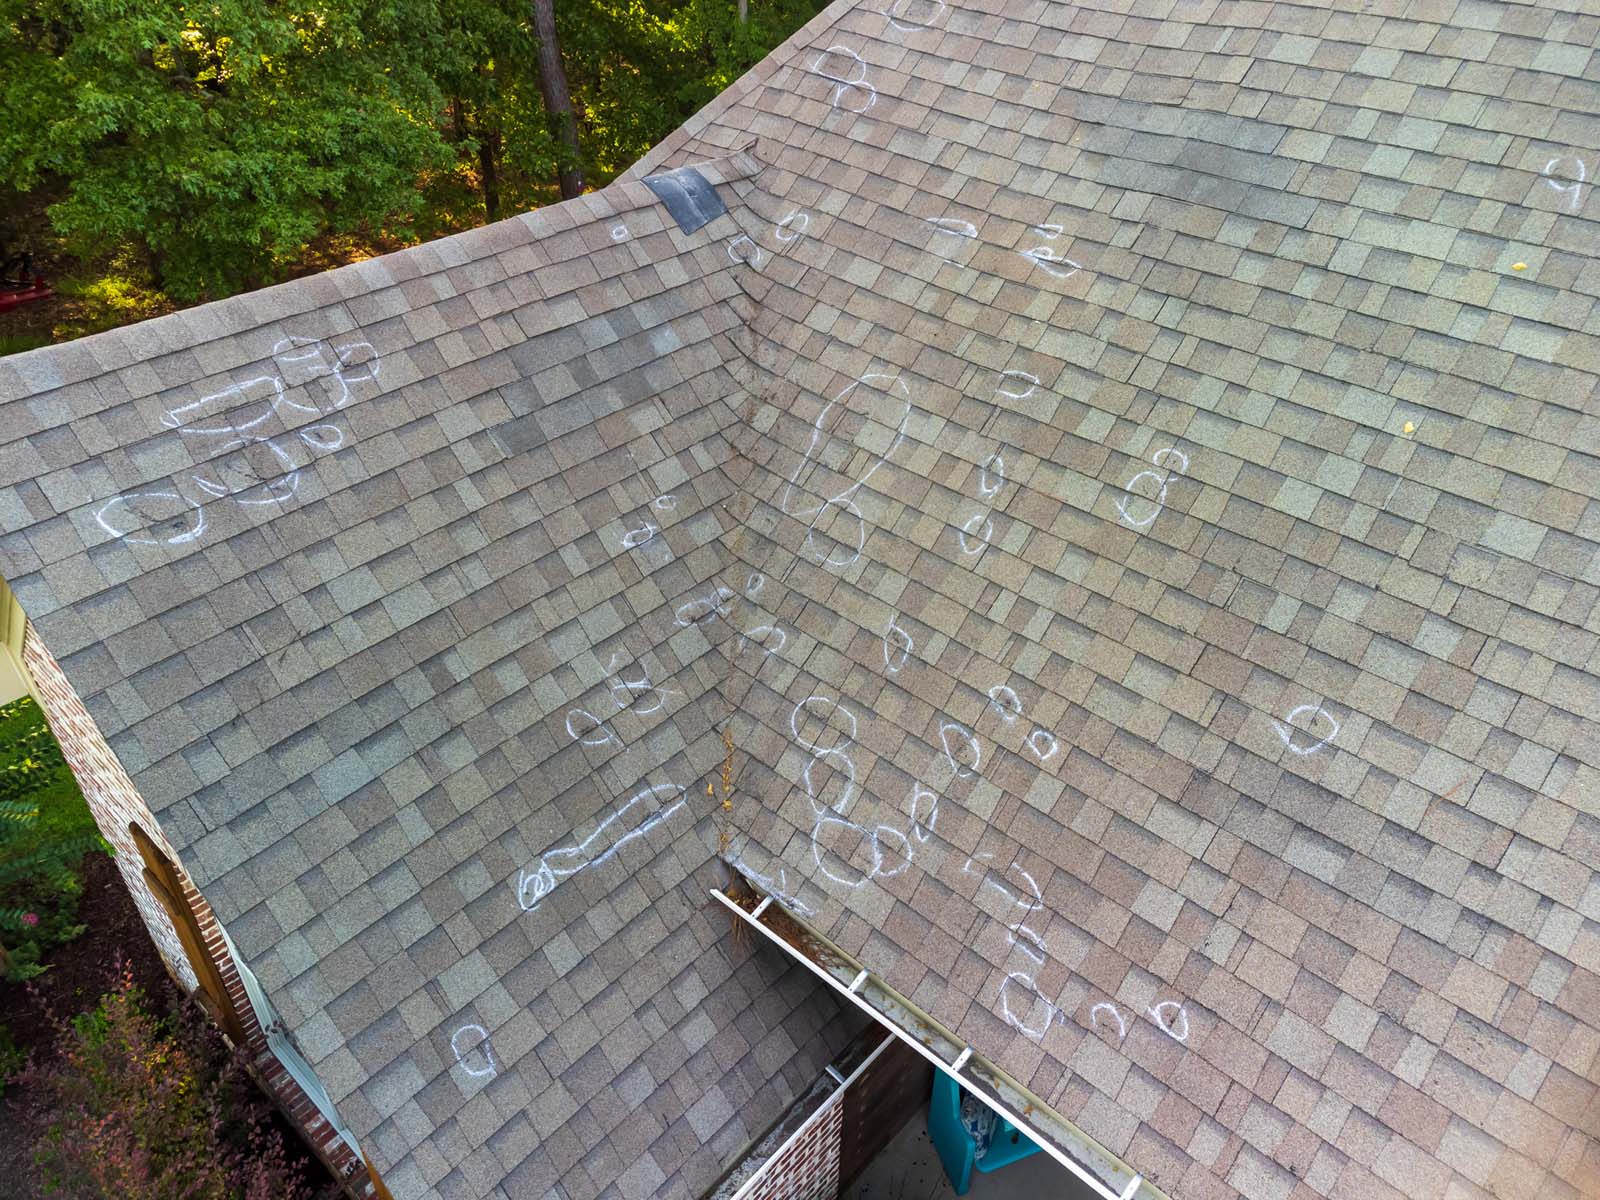 Roof with hail damage